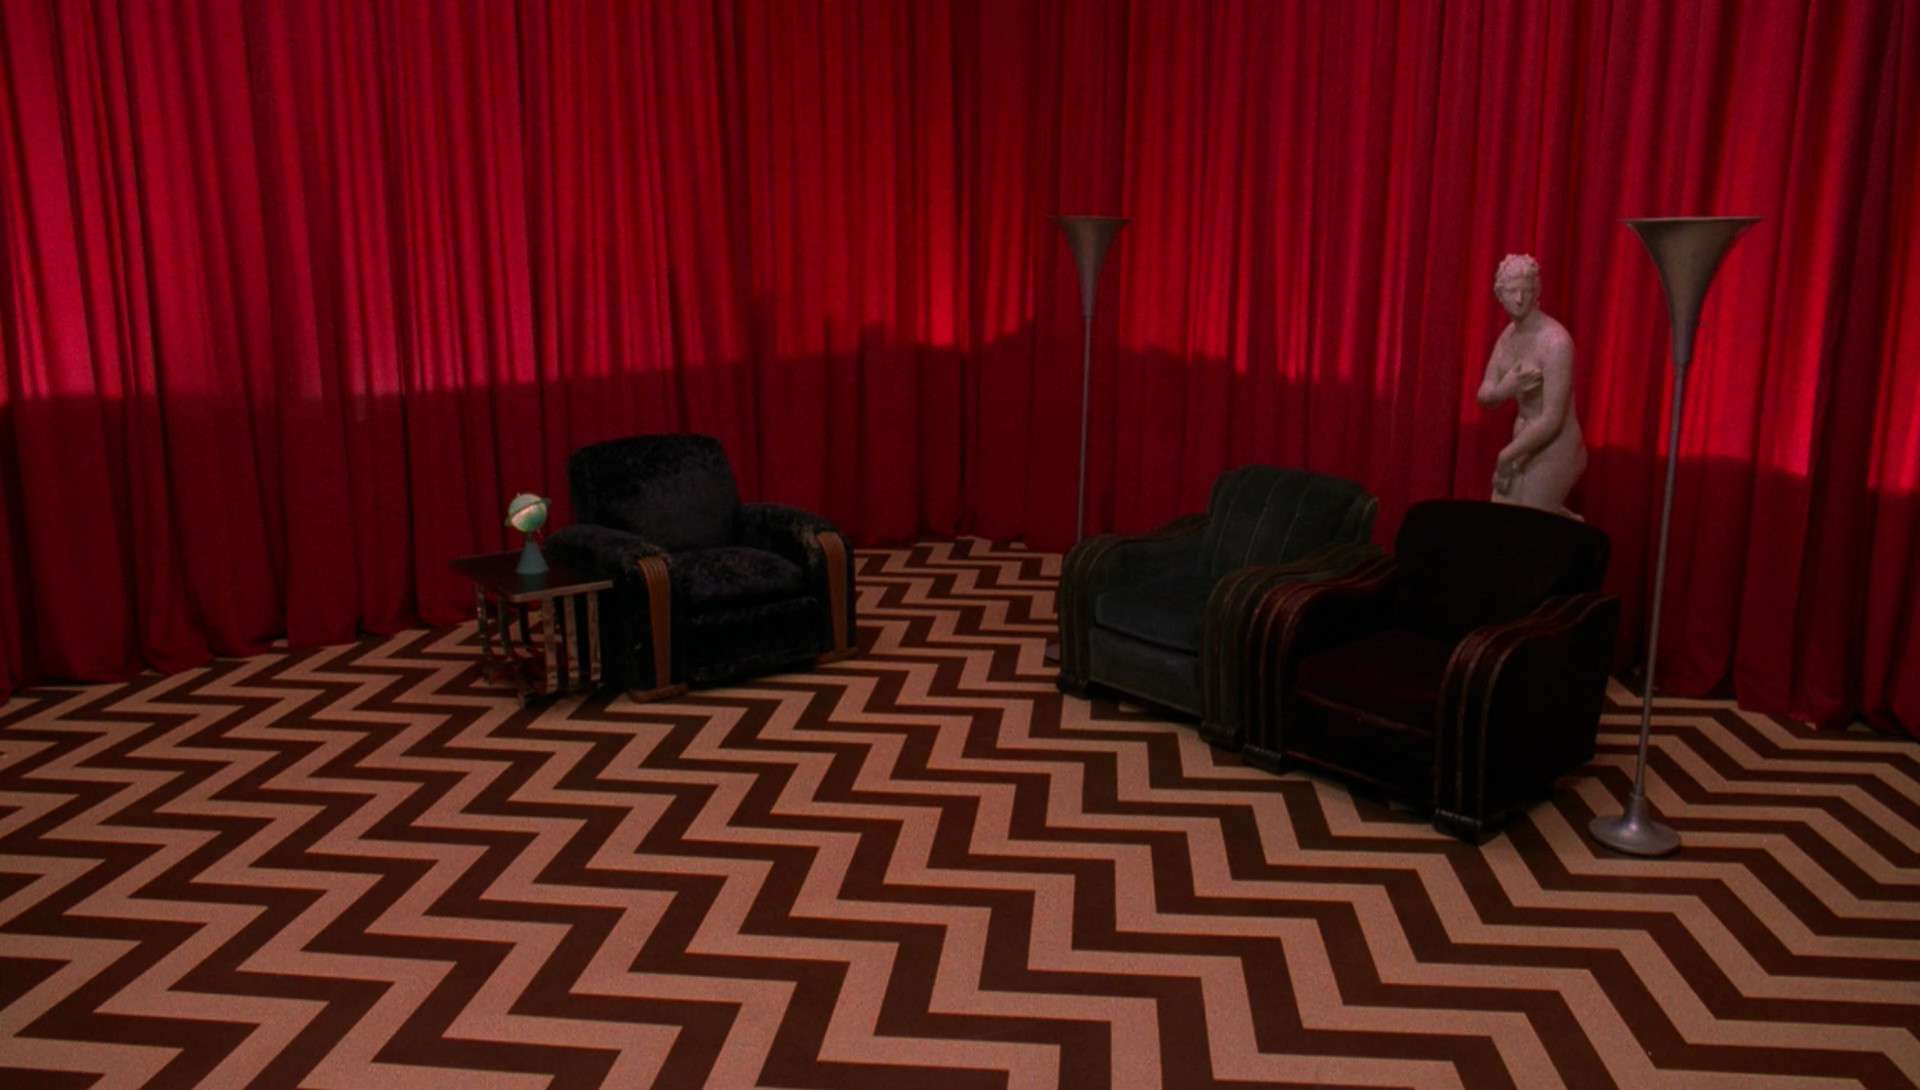 Original Run A collection of Twin Peaks desktop wallpapers I made from the Blu